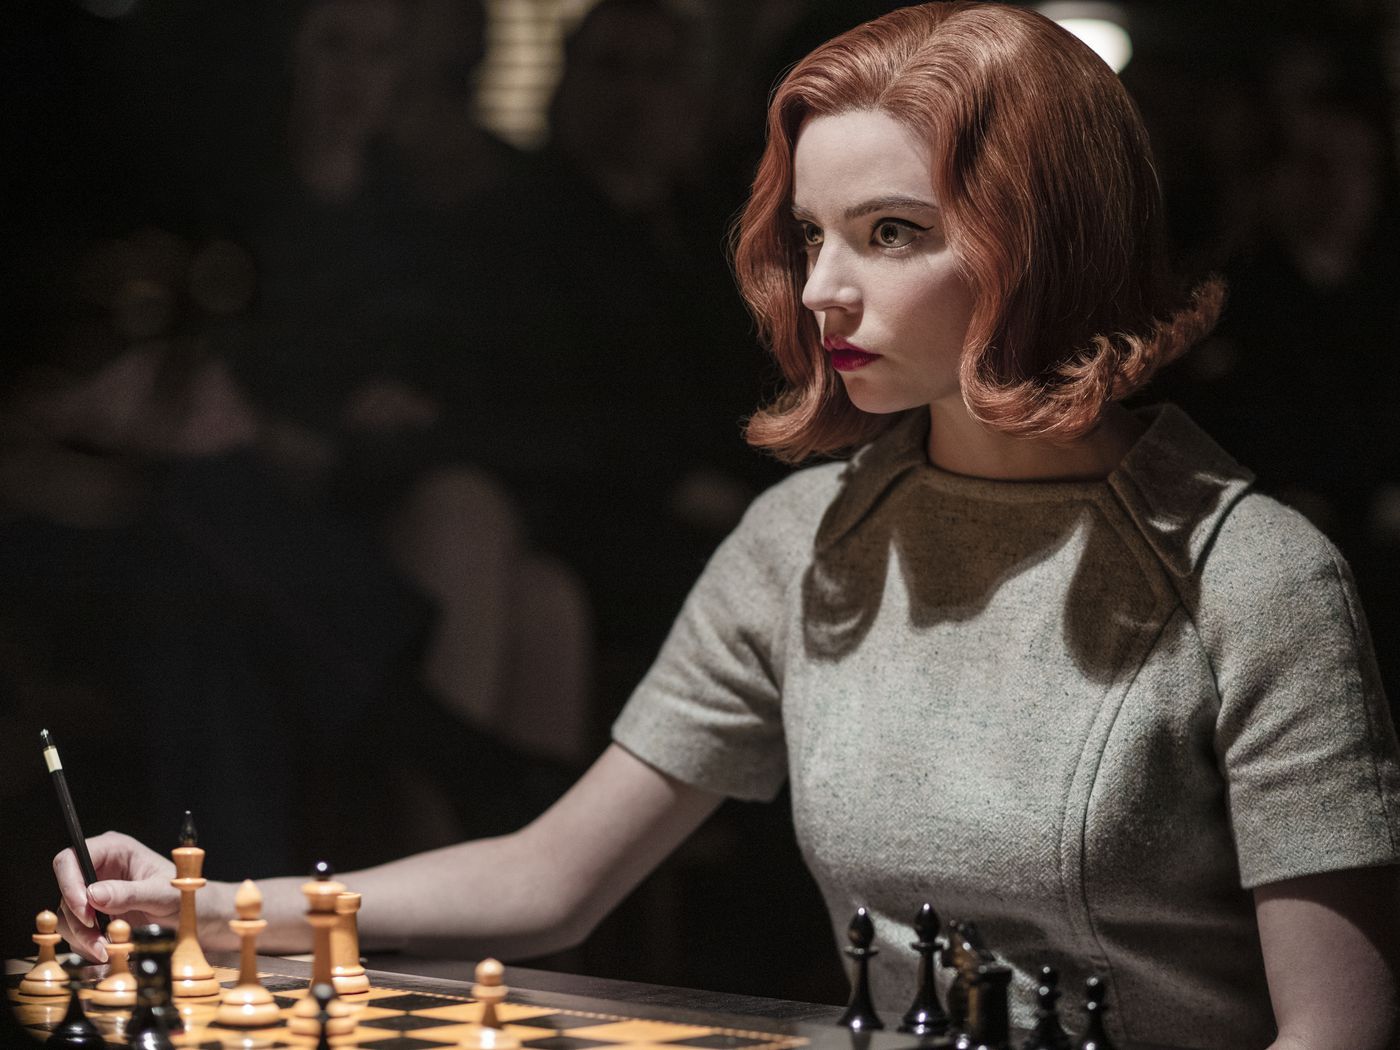 The Queen's Gambit' May Be the Best Thing on TV Right Now. Plus, Apple TV+ Is Making Moves